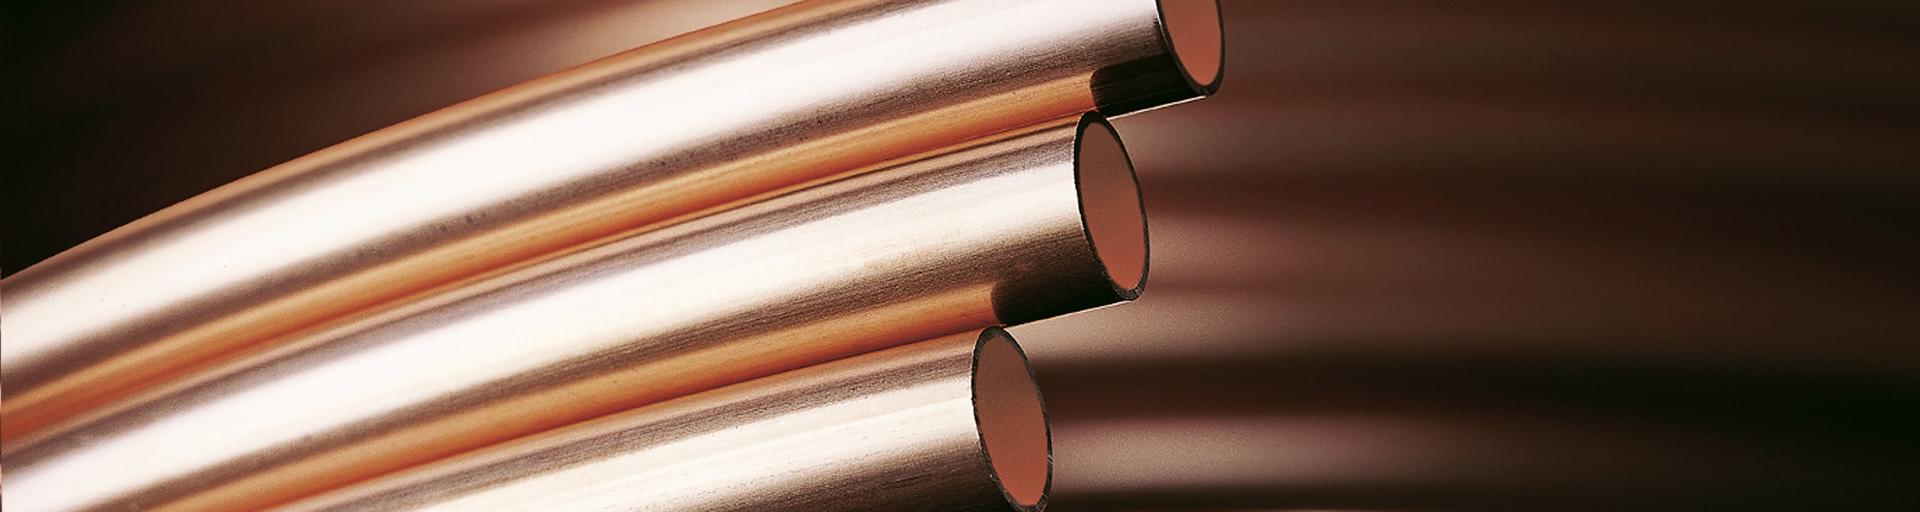 Low Lead High Performance Brass Rod Alloys - Wieland Chase